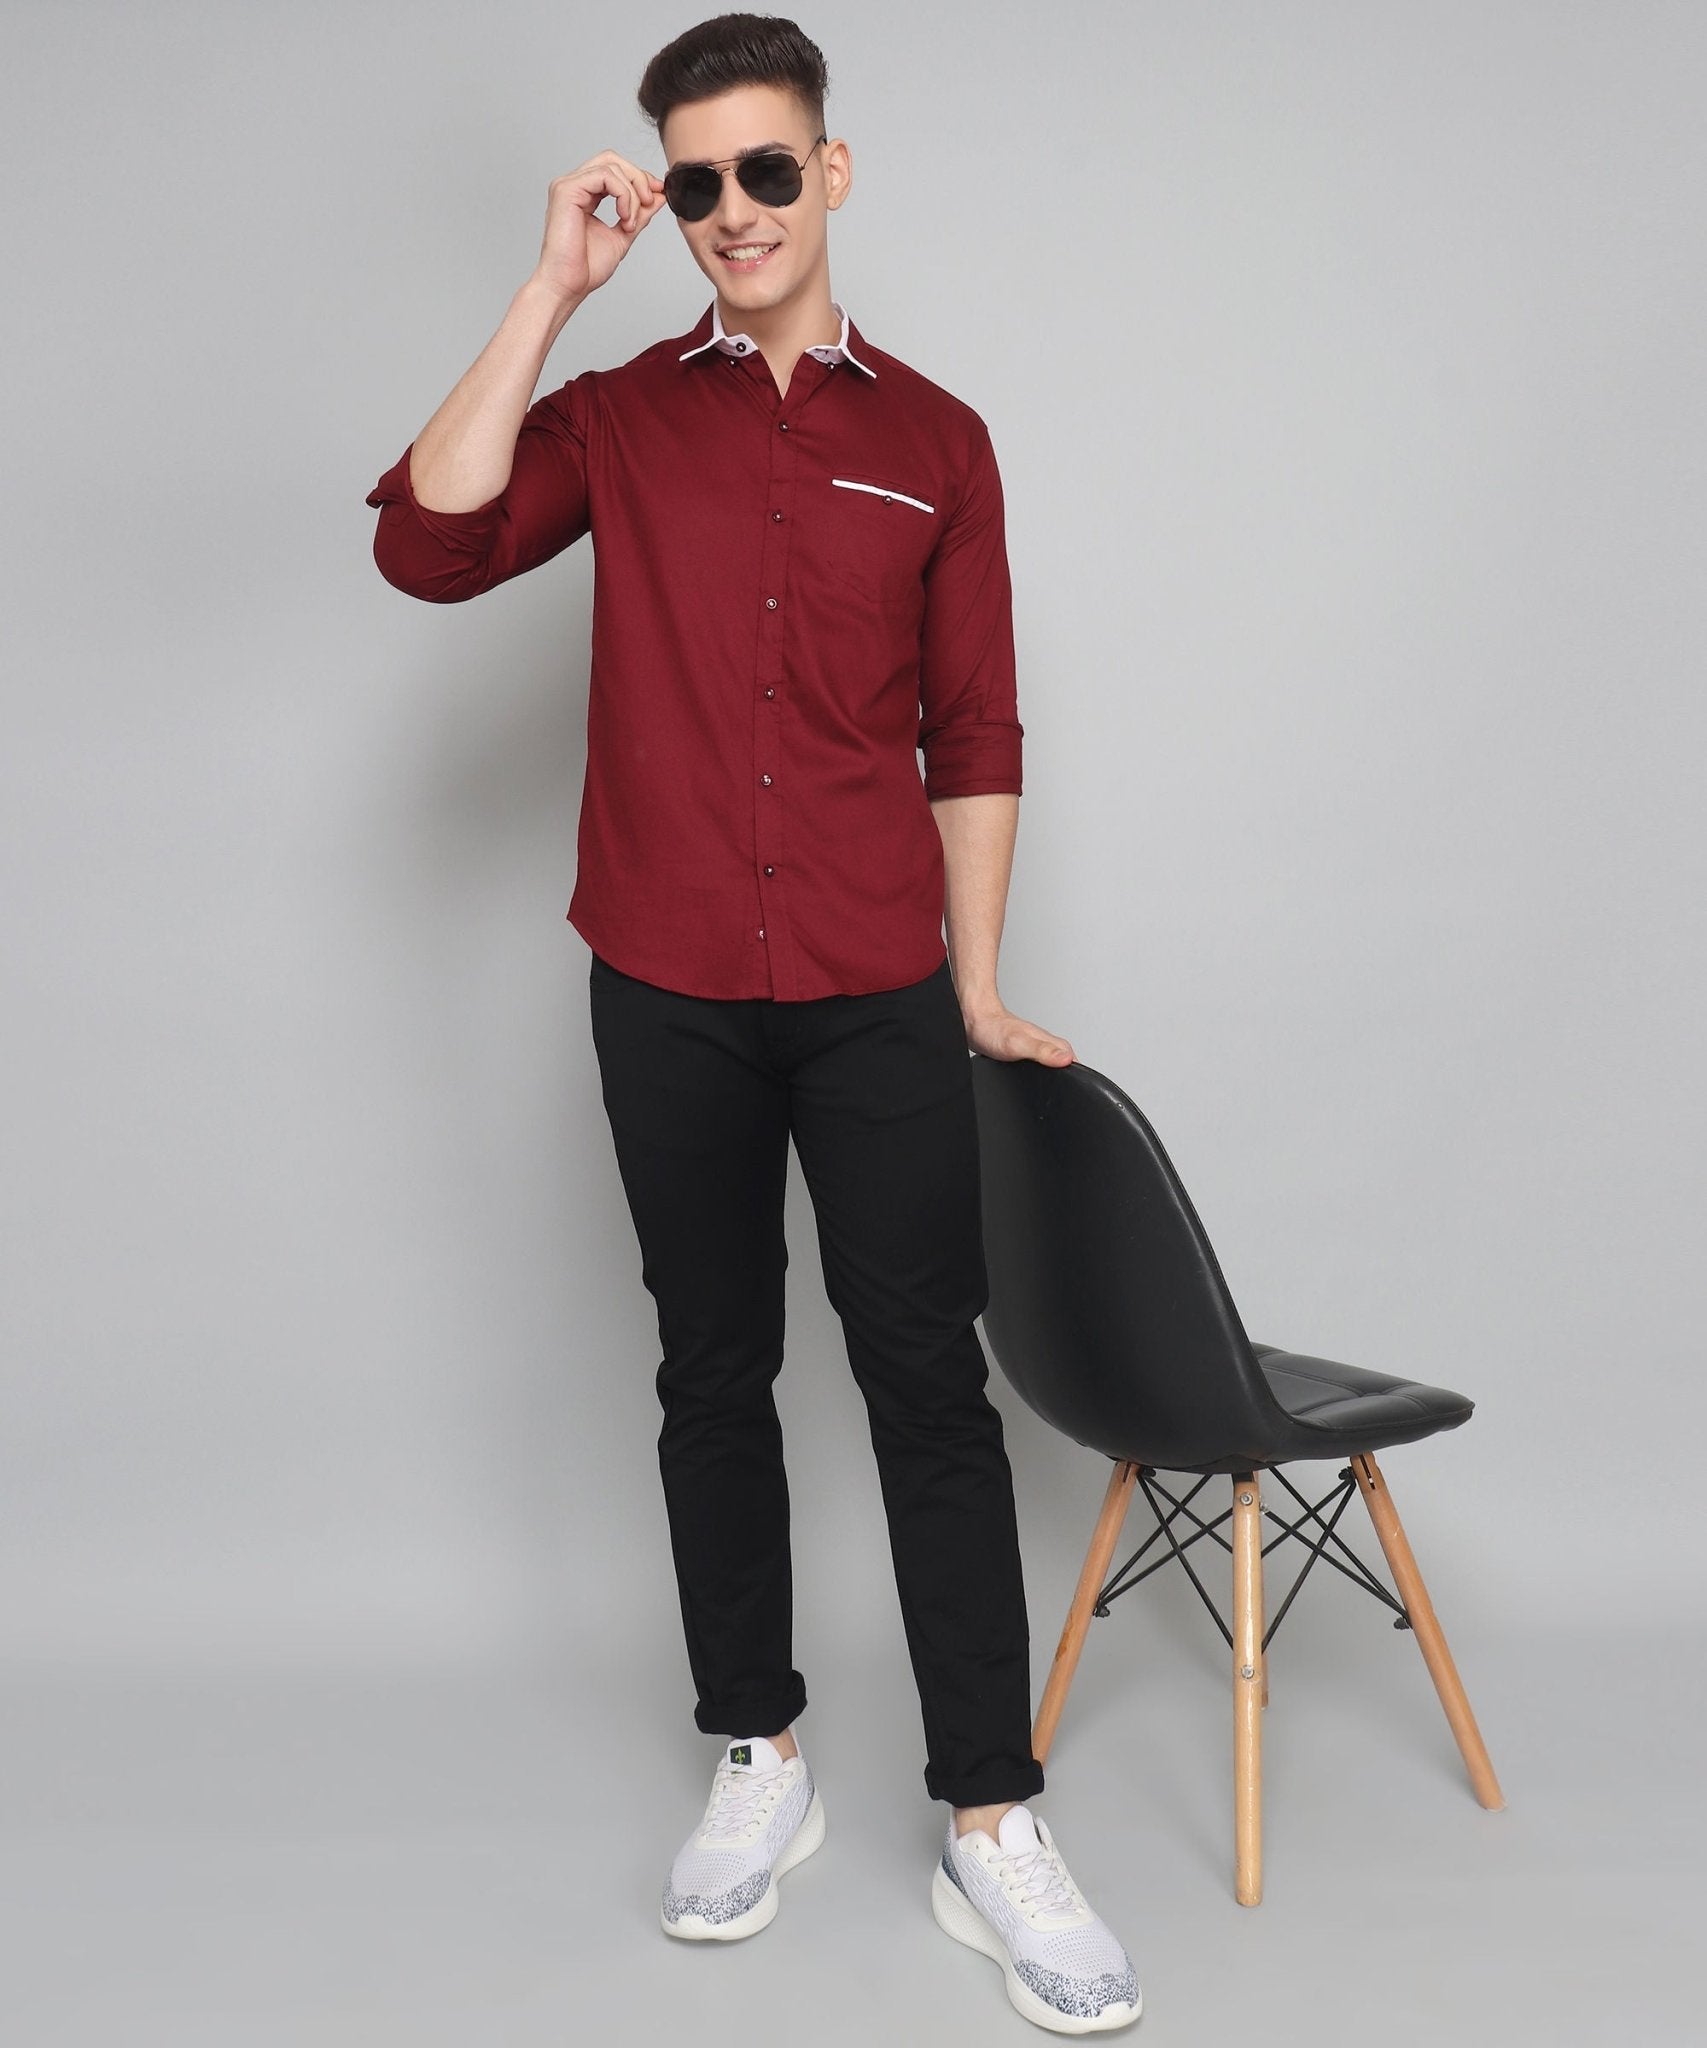 Exclusive TryBuy Premium Maroon Cotton Casual Shirt for Men - TryBuy® USA🇺🇸